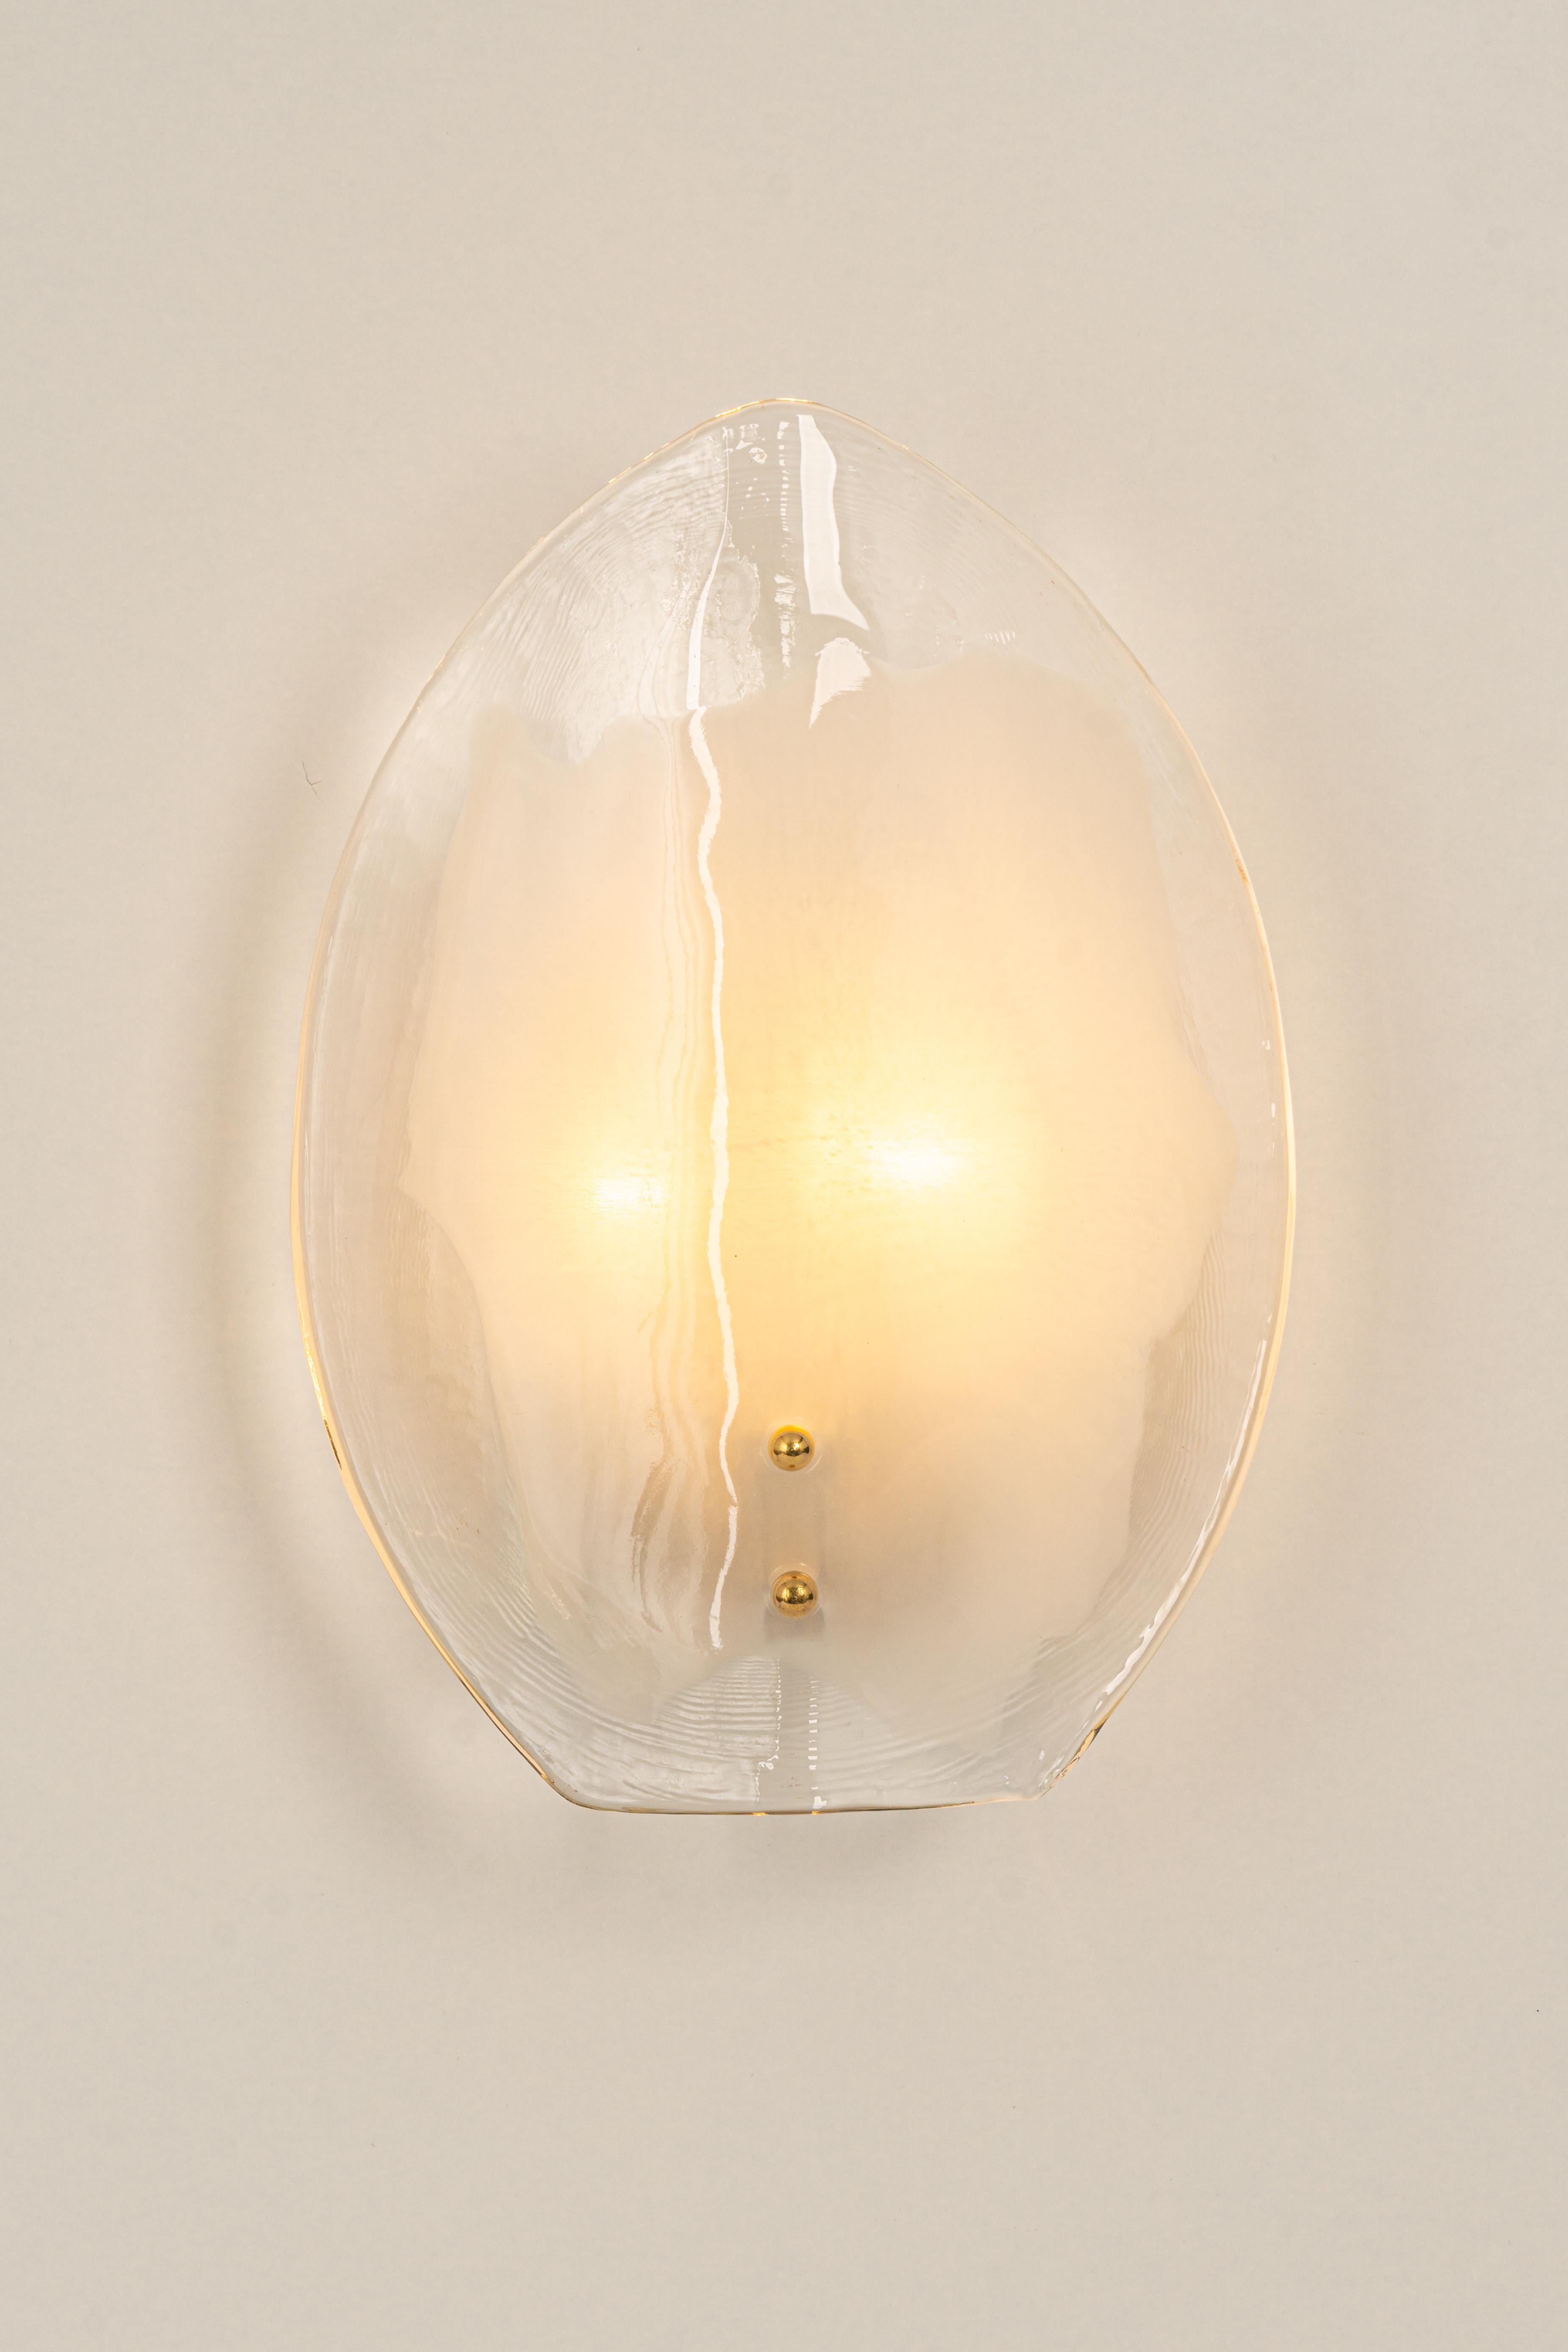 1 of 2 Pairs of Kalmar Brass & Murano Glass Sconces Wall Lights, Austria, 1970s For Sale 7